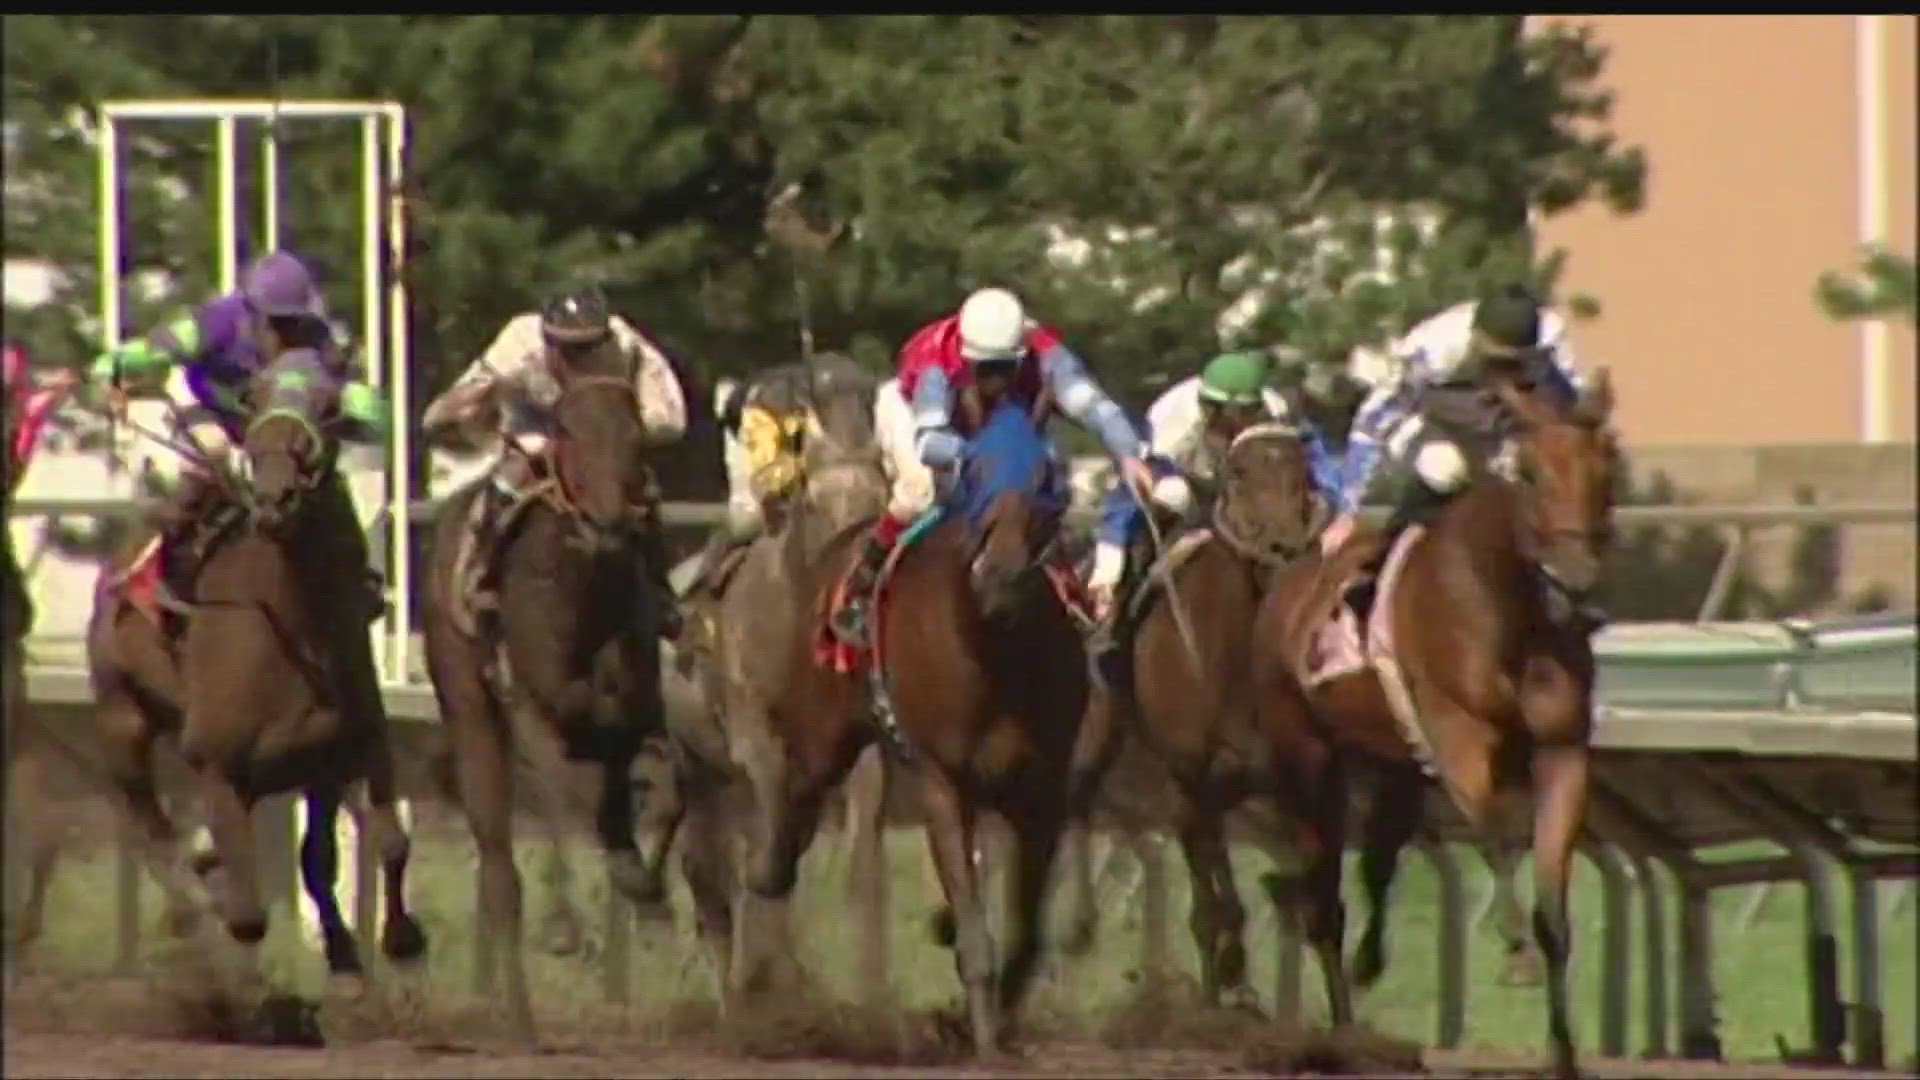 Democrat bill would send $20 million to horse racetracks in lieu of allowing sports betting on premises. Republicans prefer allowing those tracks to host wagering.